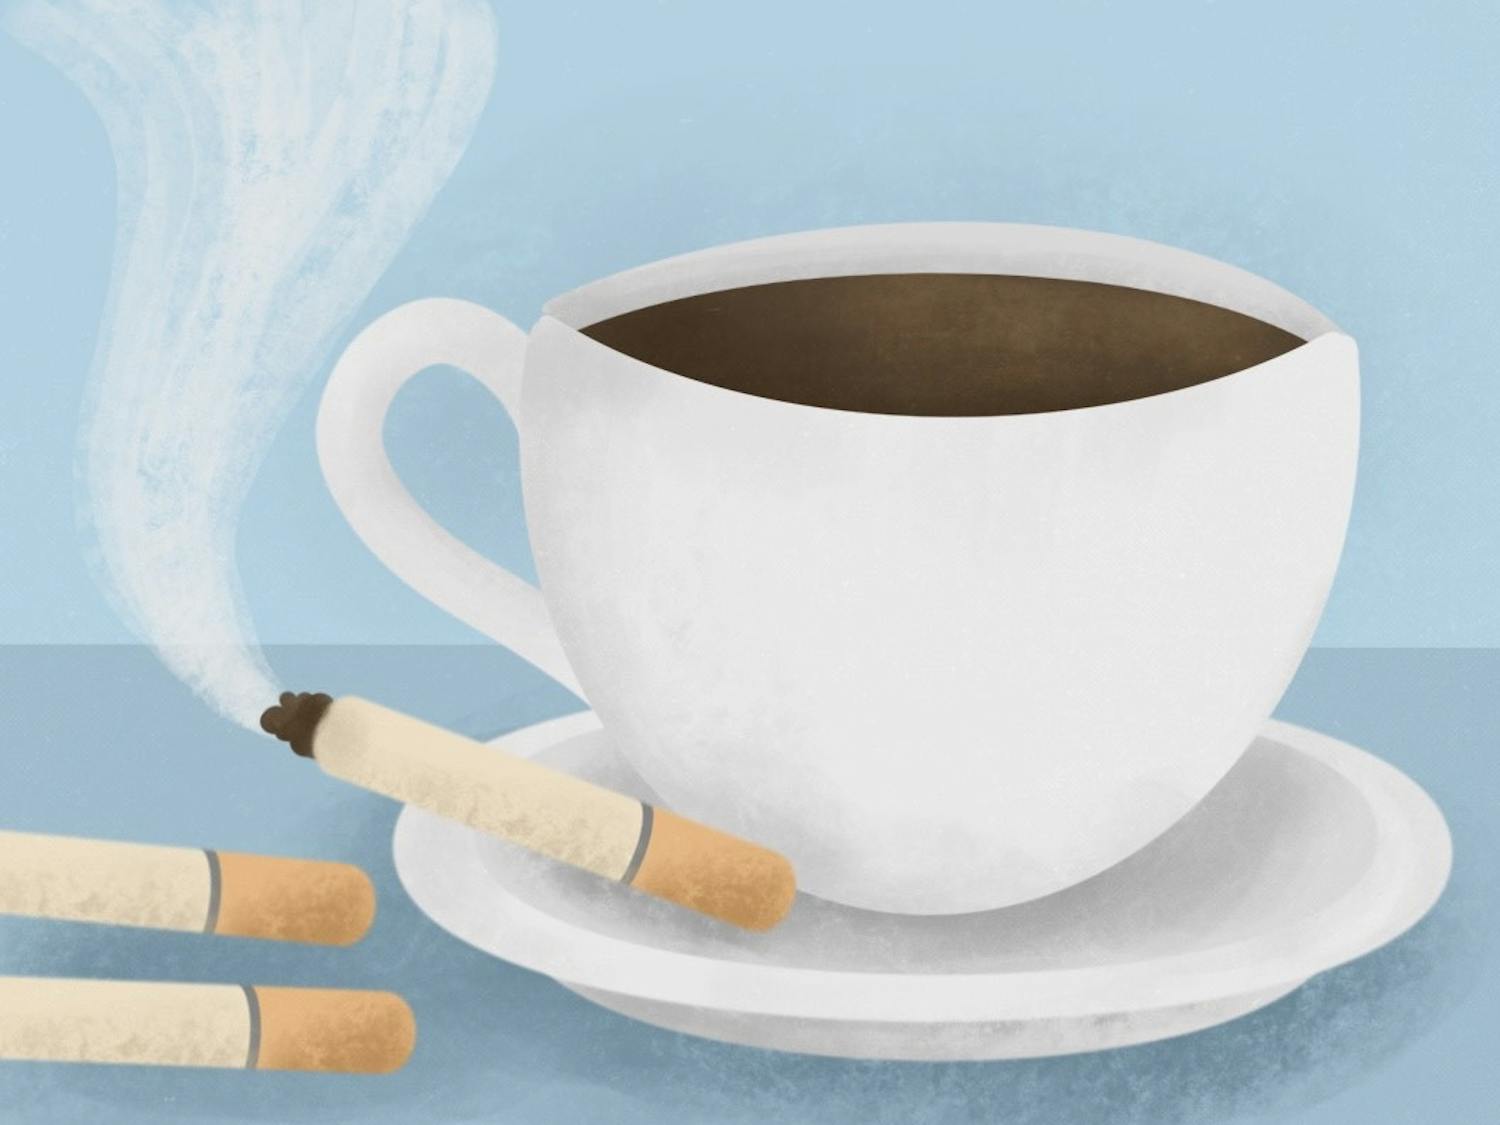 The medical school recently put out a study saying coffee could help with nicotine addiction, especially in the morning, because after a night of no nicotine a molecule in coffee can help soothe some active addicted receptors in your brain. 